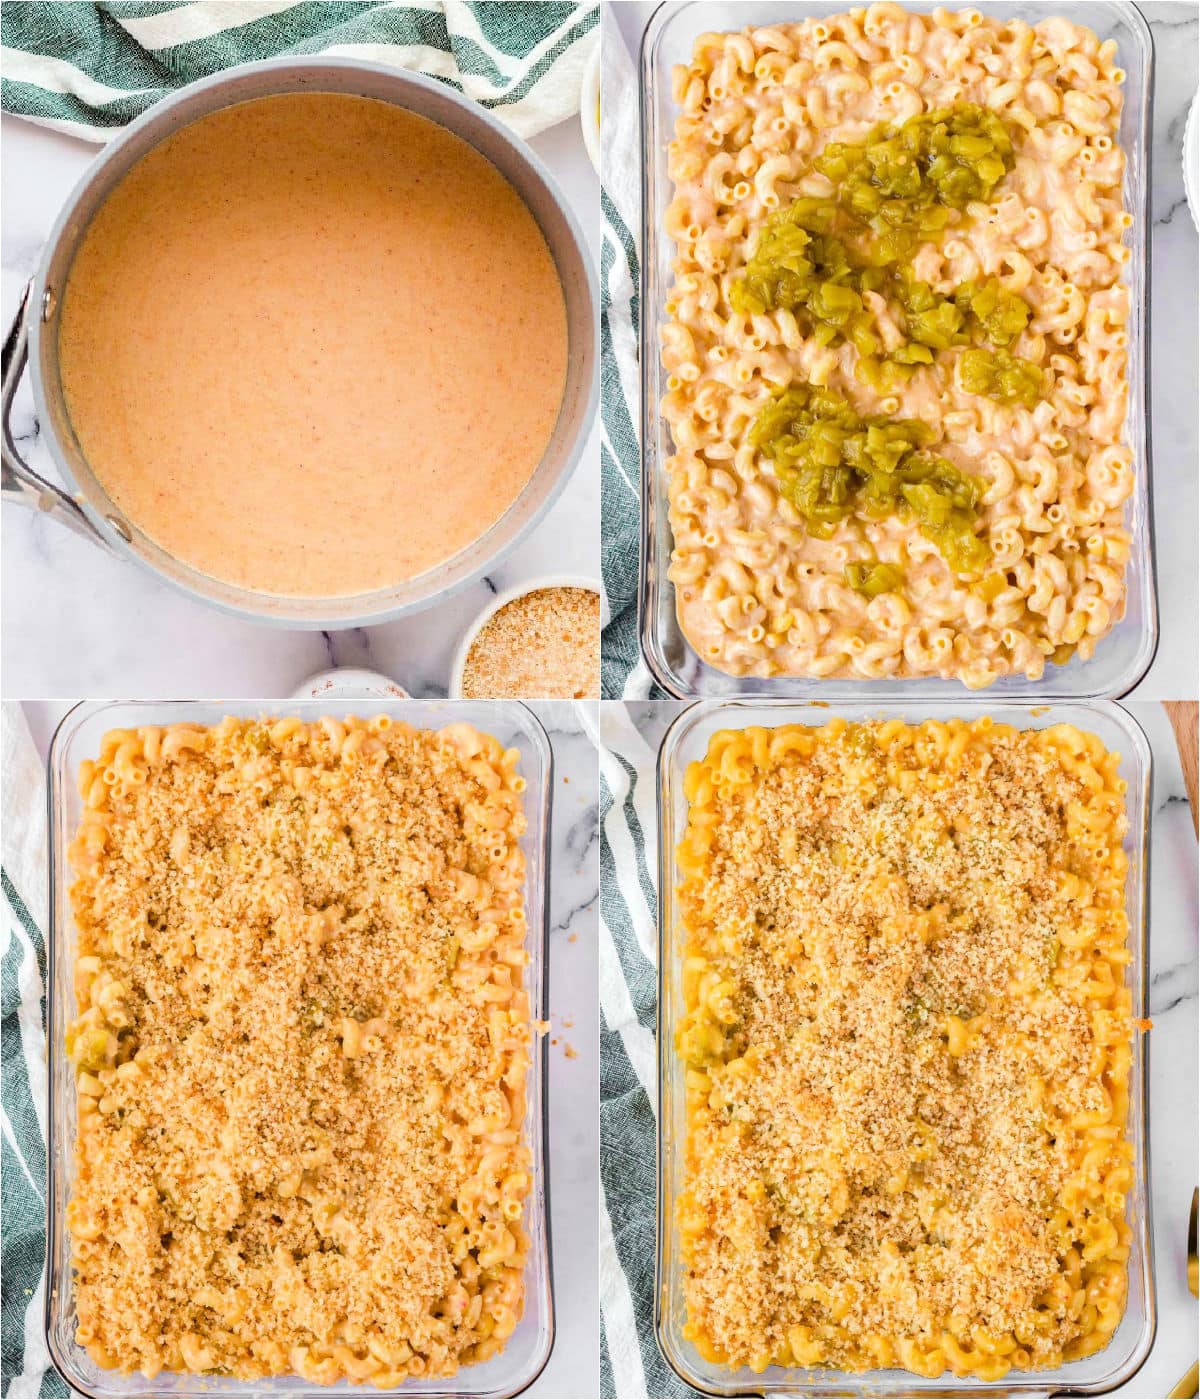 four image collage showing how to make green chile mac and cheese step by step.